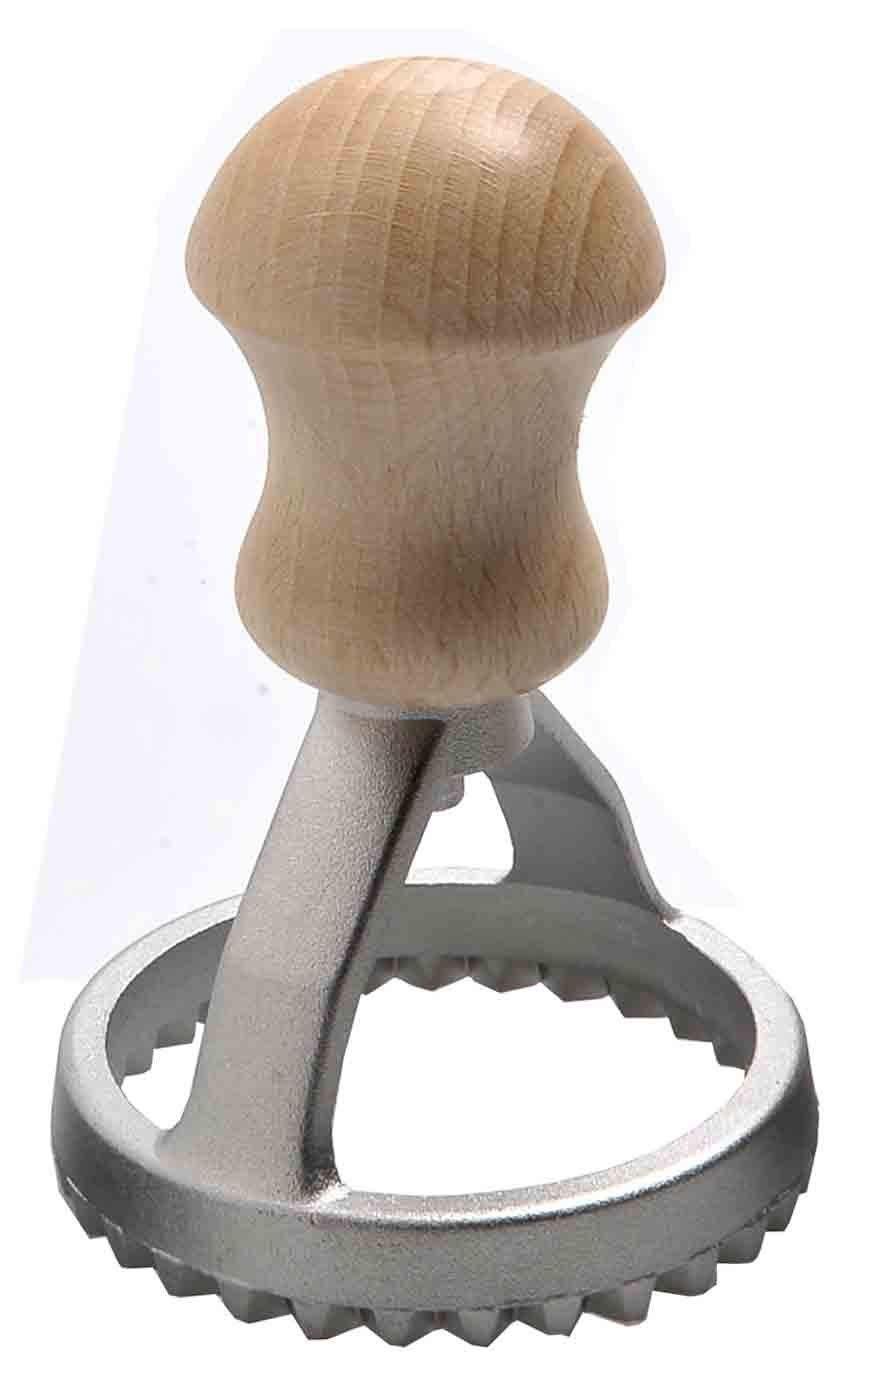 Eppicotispai ROUND 60mm Cutter-Cookware-Eppicotispai-Carbon Knife Co